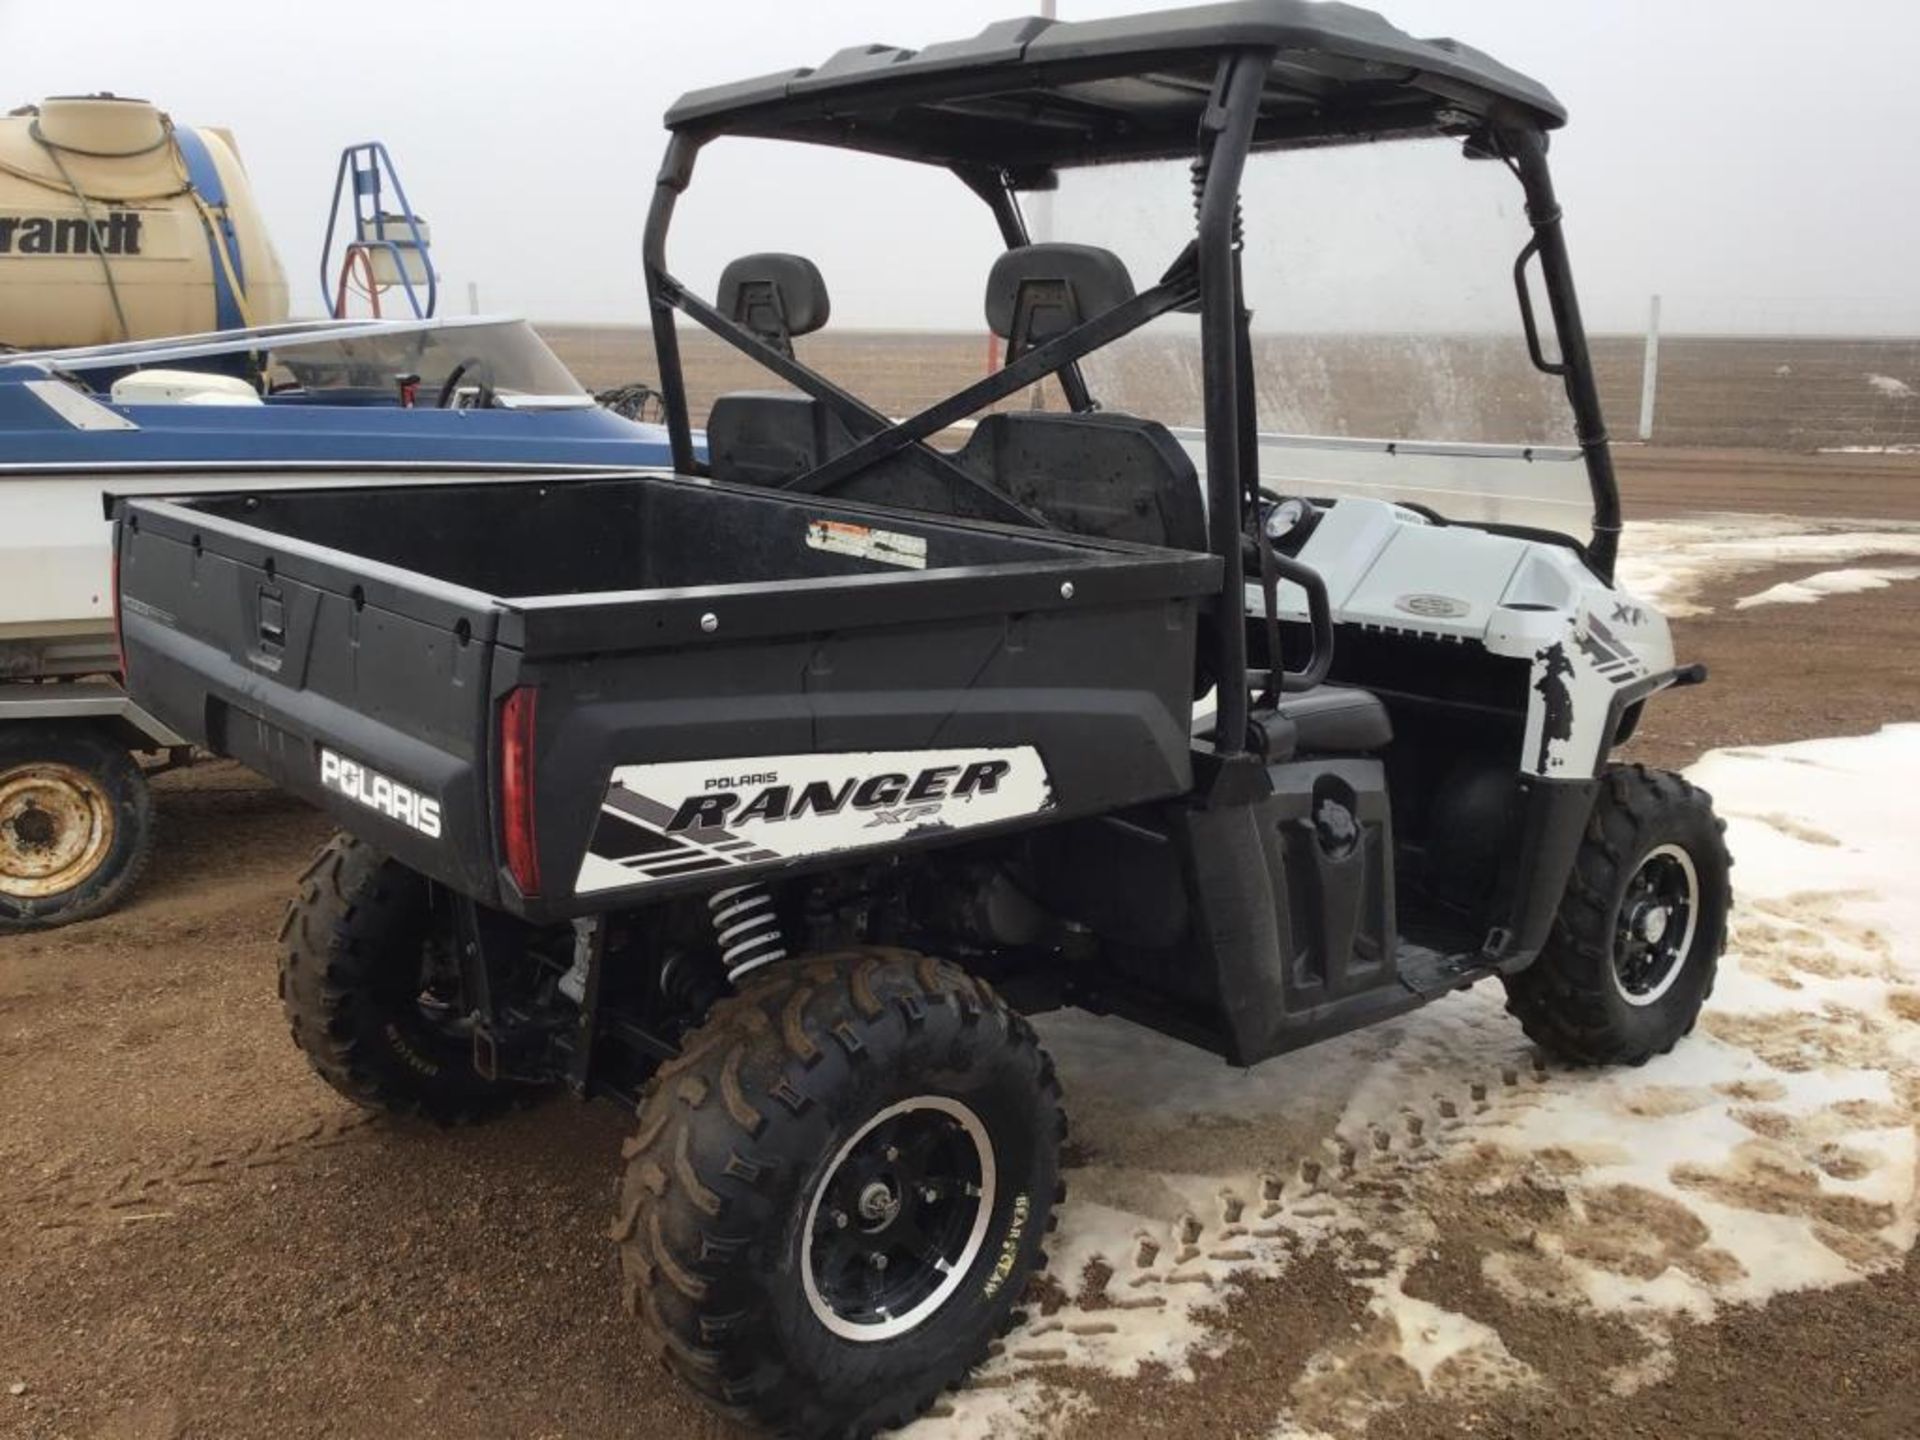 2012 Polaris 800 Ranger Side-by-side Utility Vehie - Image 3 of 5